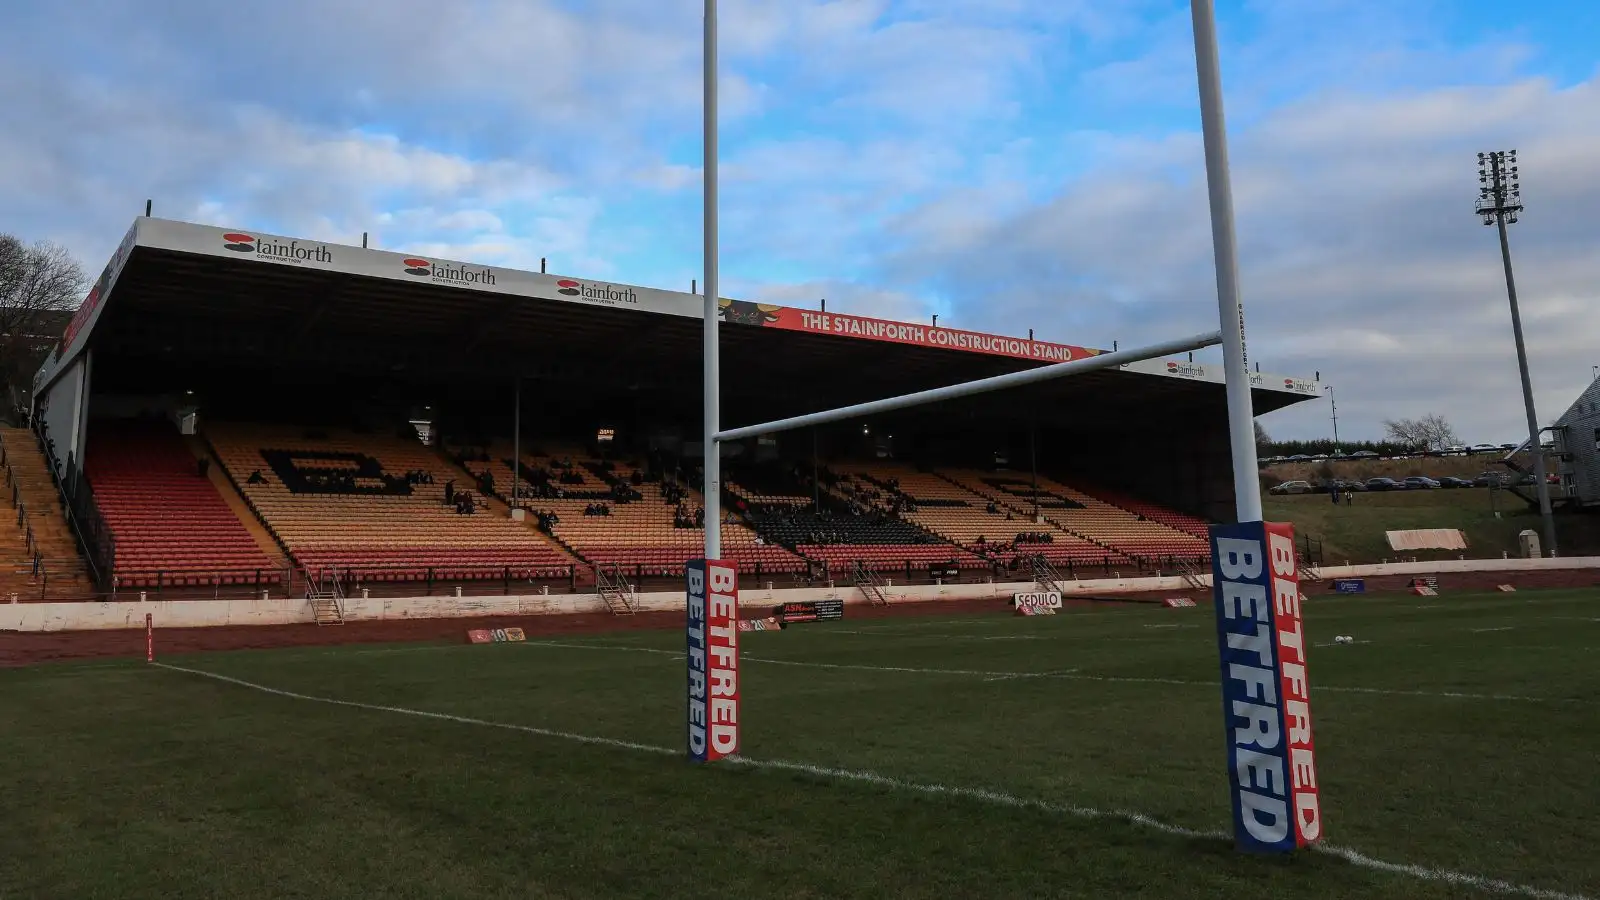 Odsal: what next? Everything we know about lease situation as bid deadline passes